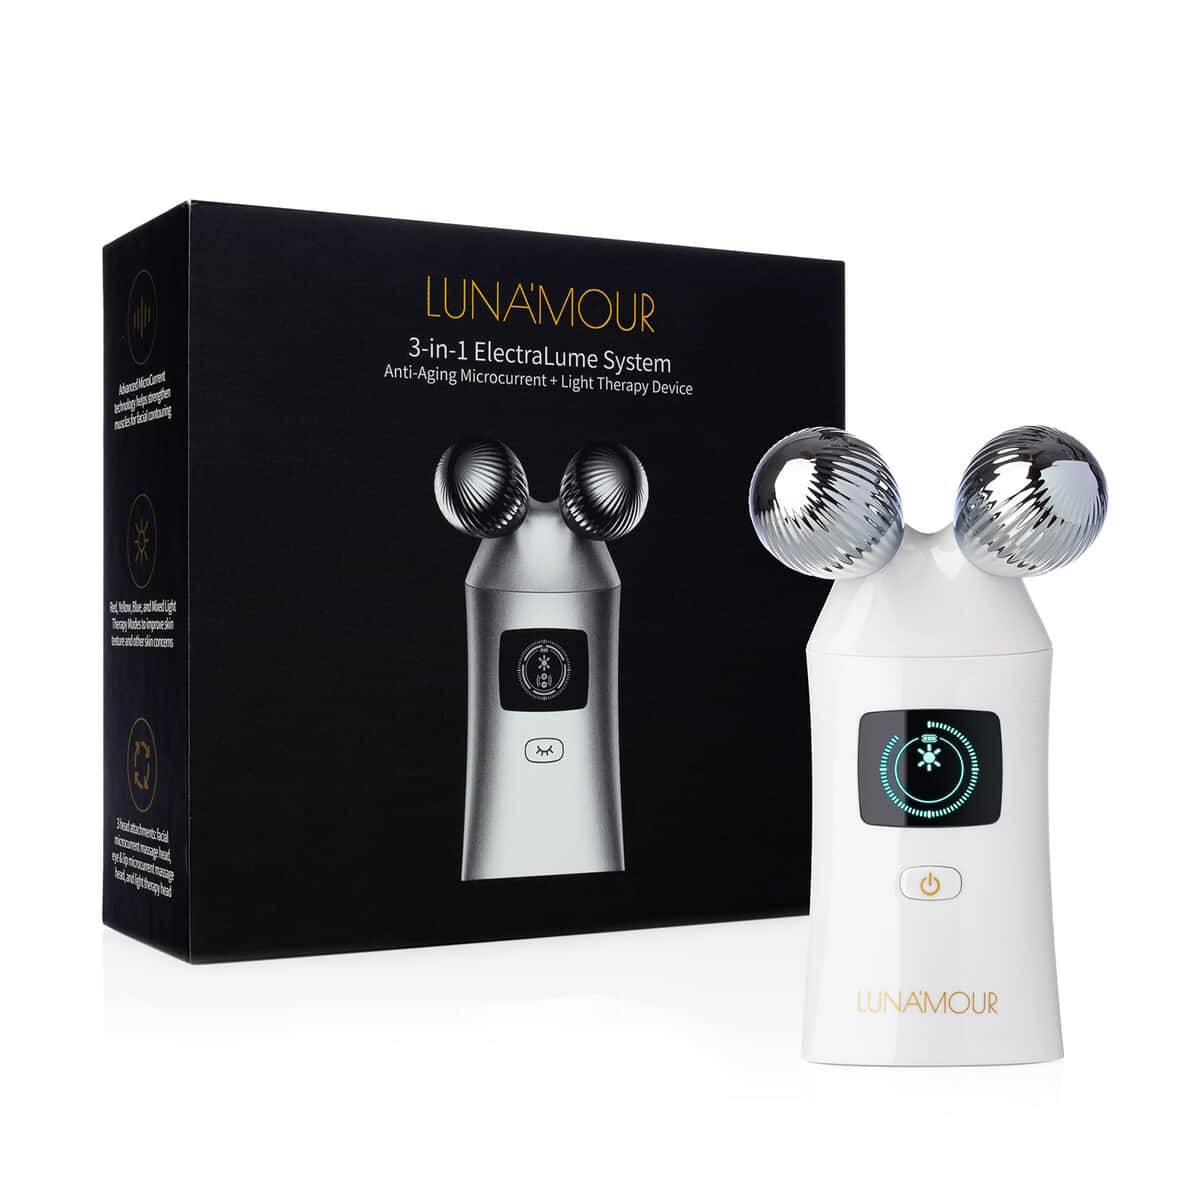 Luna'Mour 3-in-1 ElectraLume System Anti-Aging Microcurrent + Light Therapy Device image number 0